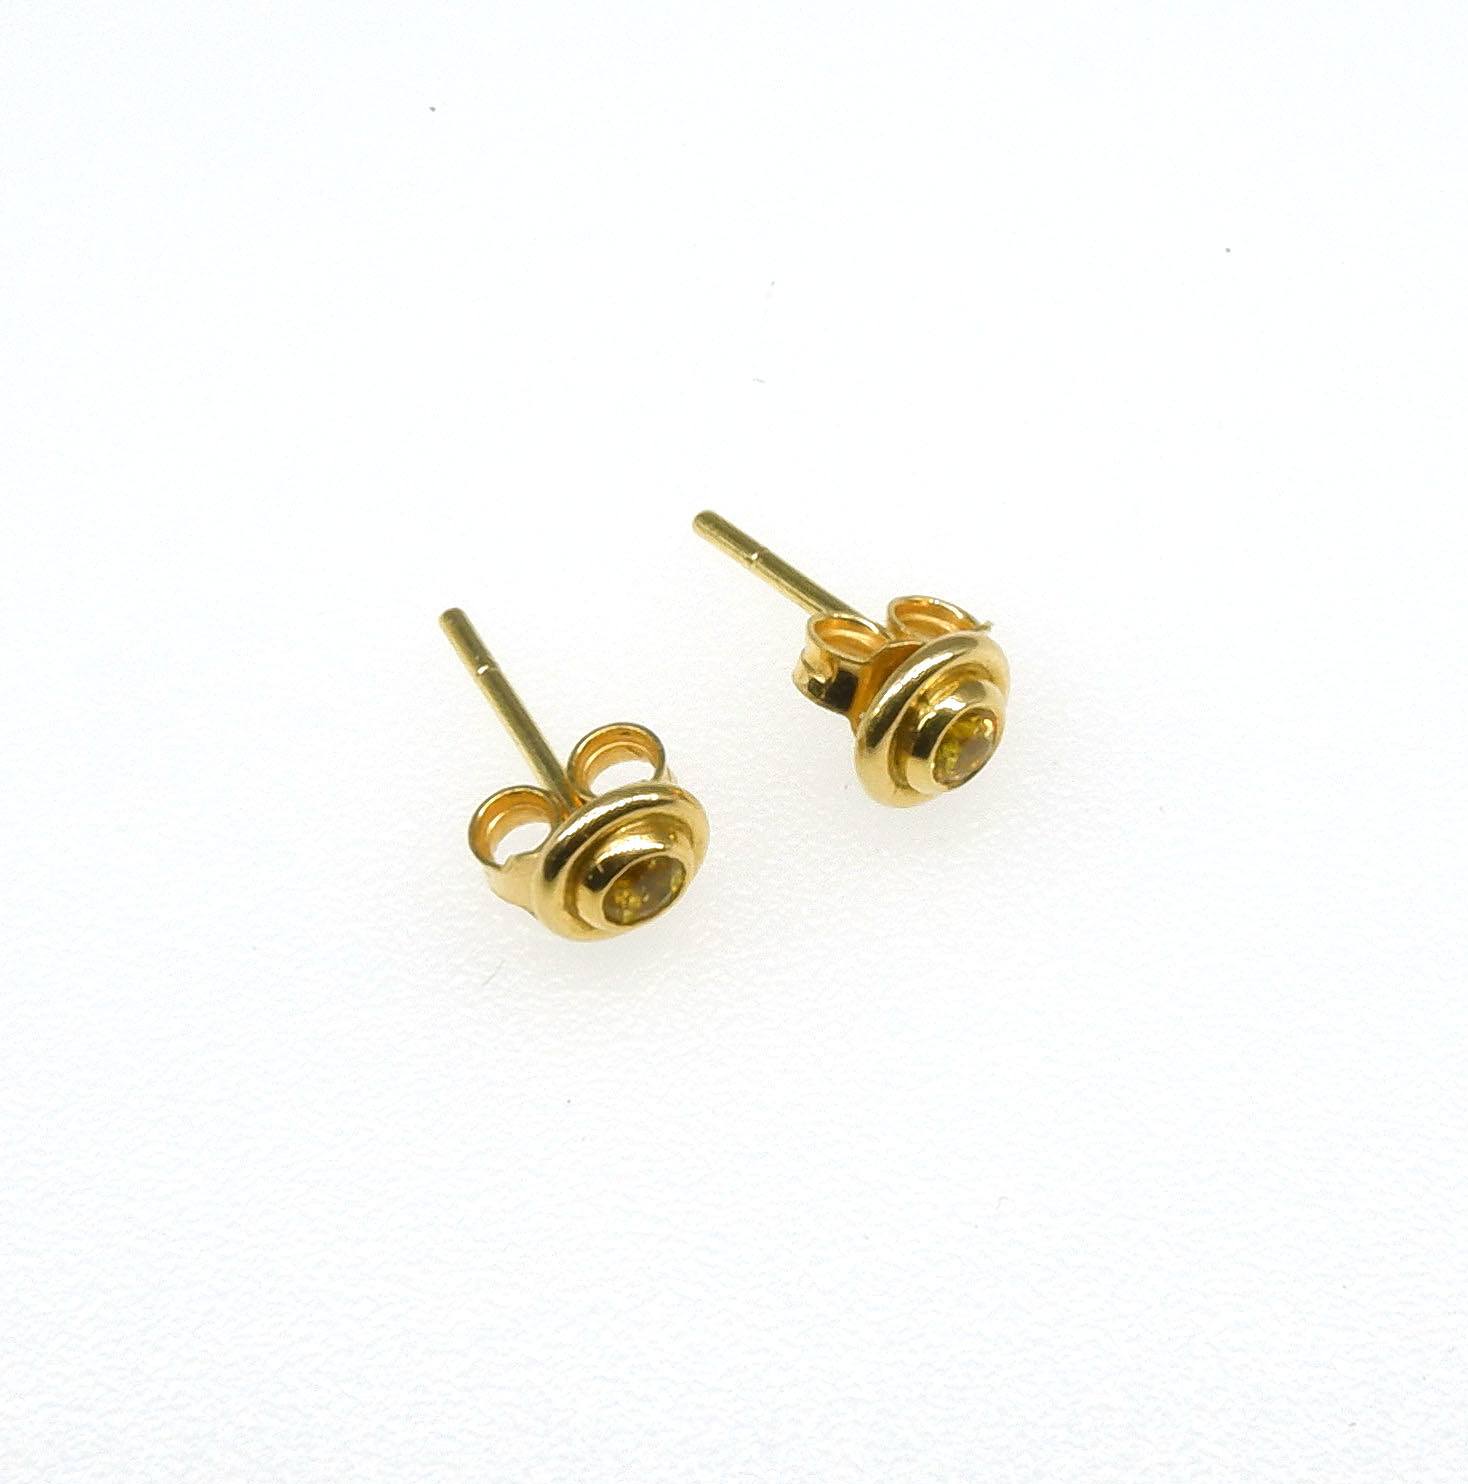 '18ct Yellow Gold Stud Earrings with Bezel Set Round Facetted Bright Yellow Sapphire with a Frame'